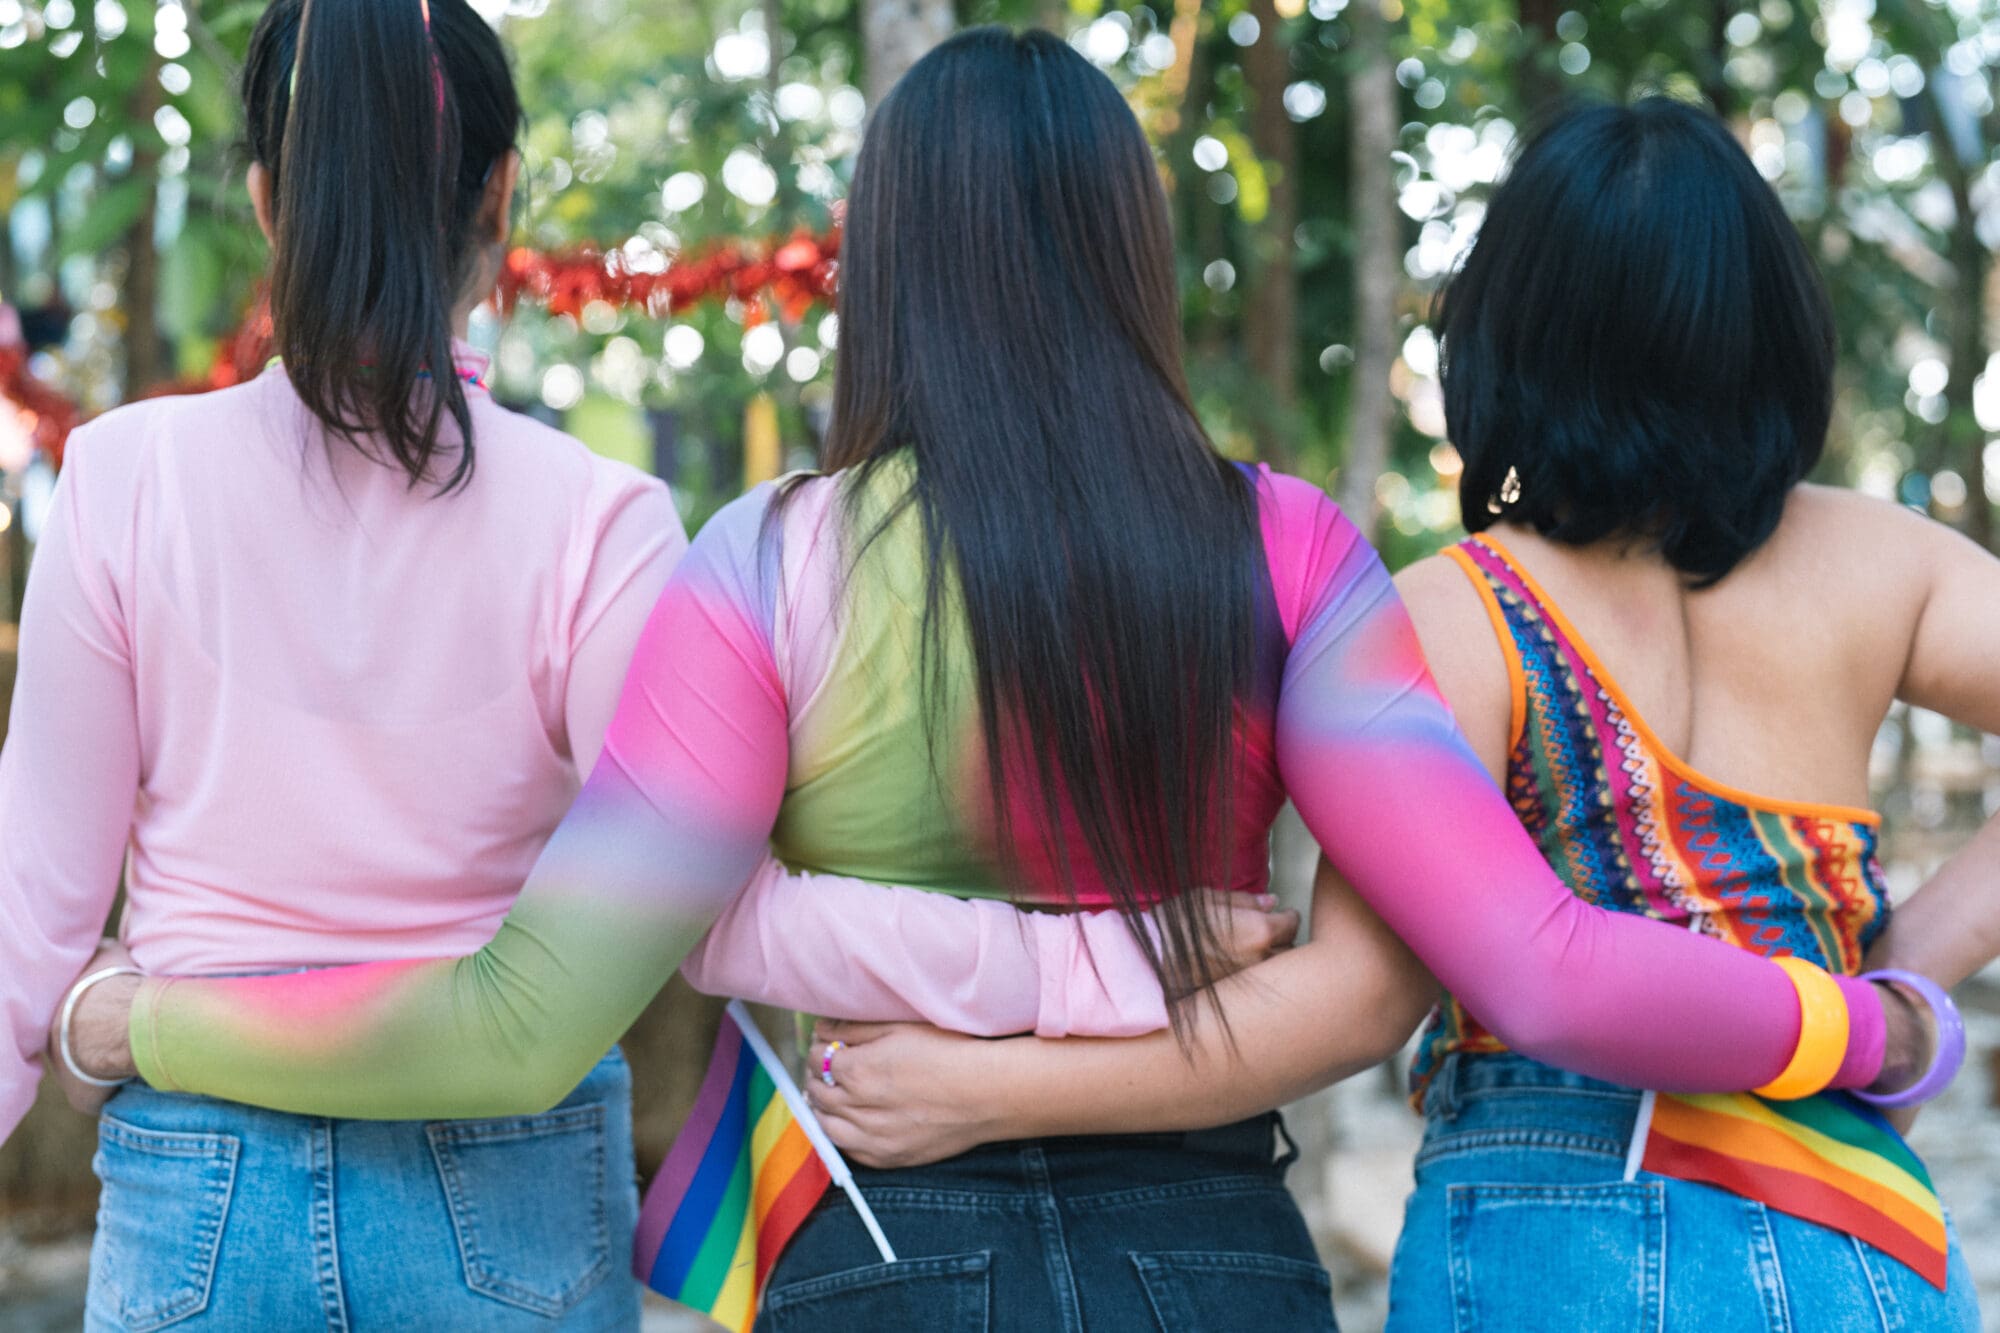 LGBTQ teens who have struggled with risk factors of suicidal ideation.